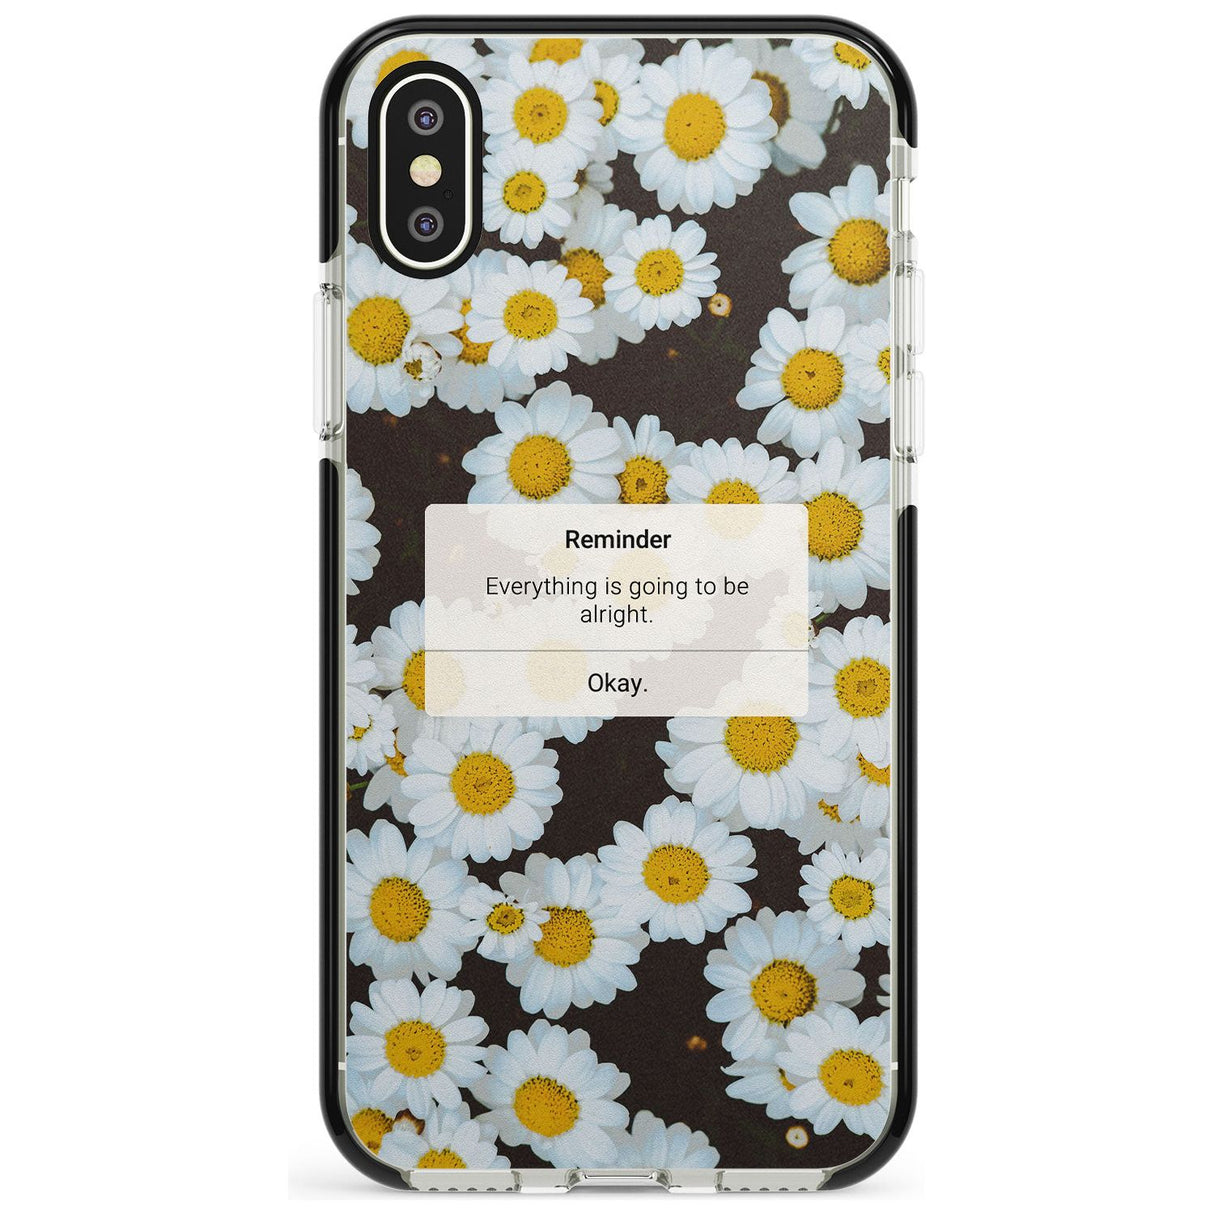 "Everything will be alright" iPhone Reminder Pink Fade Impact Phone Case for iPhone X XS Max XR